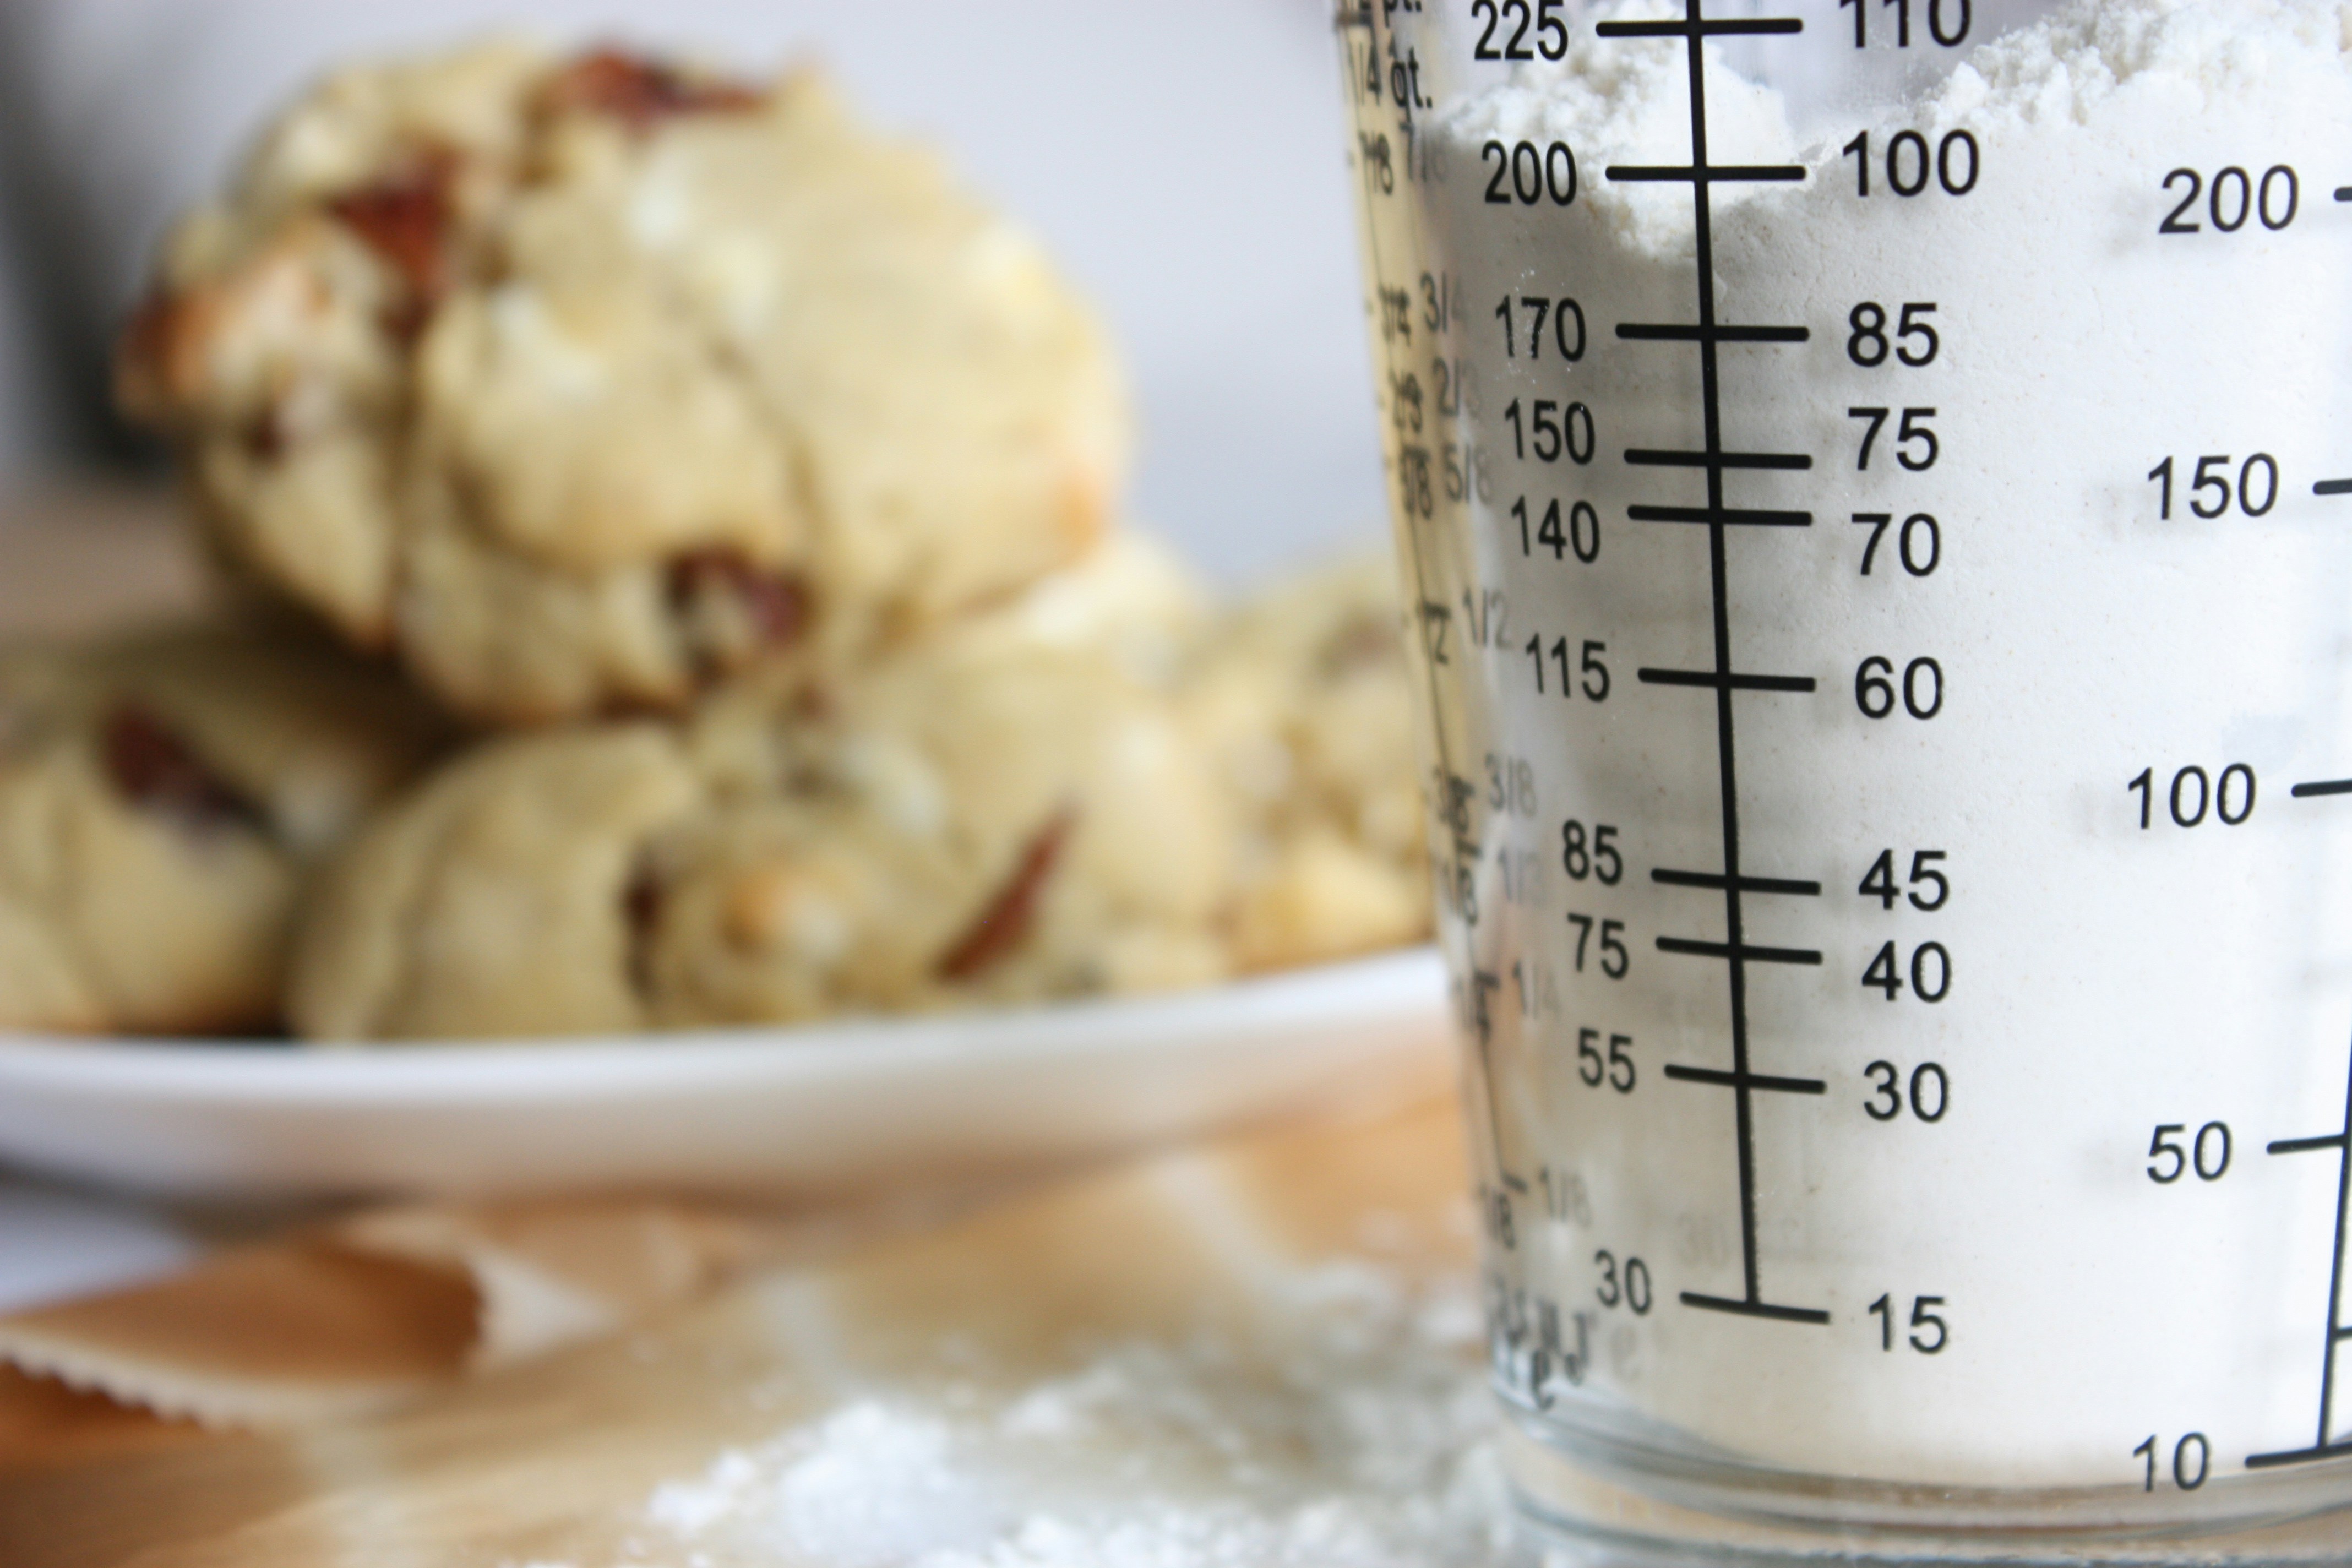 What is 150 grams in cups? · Cooking Measurements & Conversion Chart